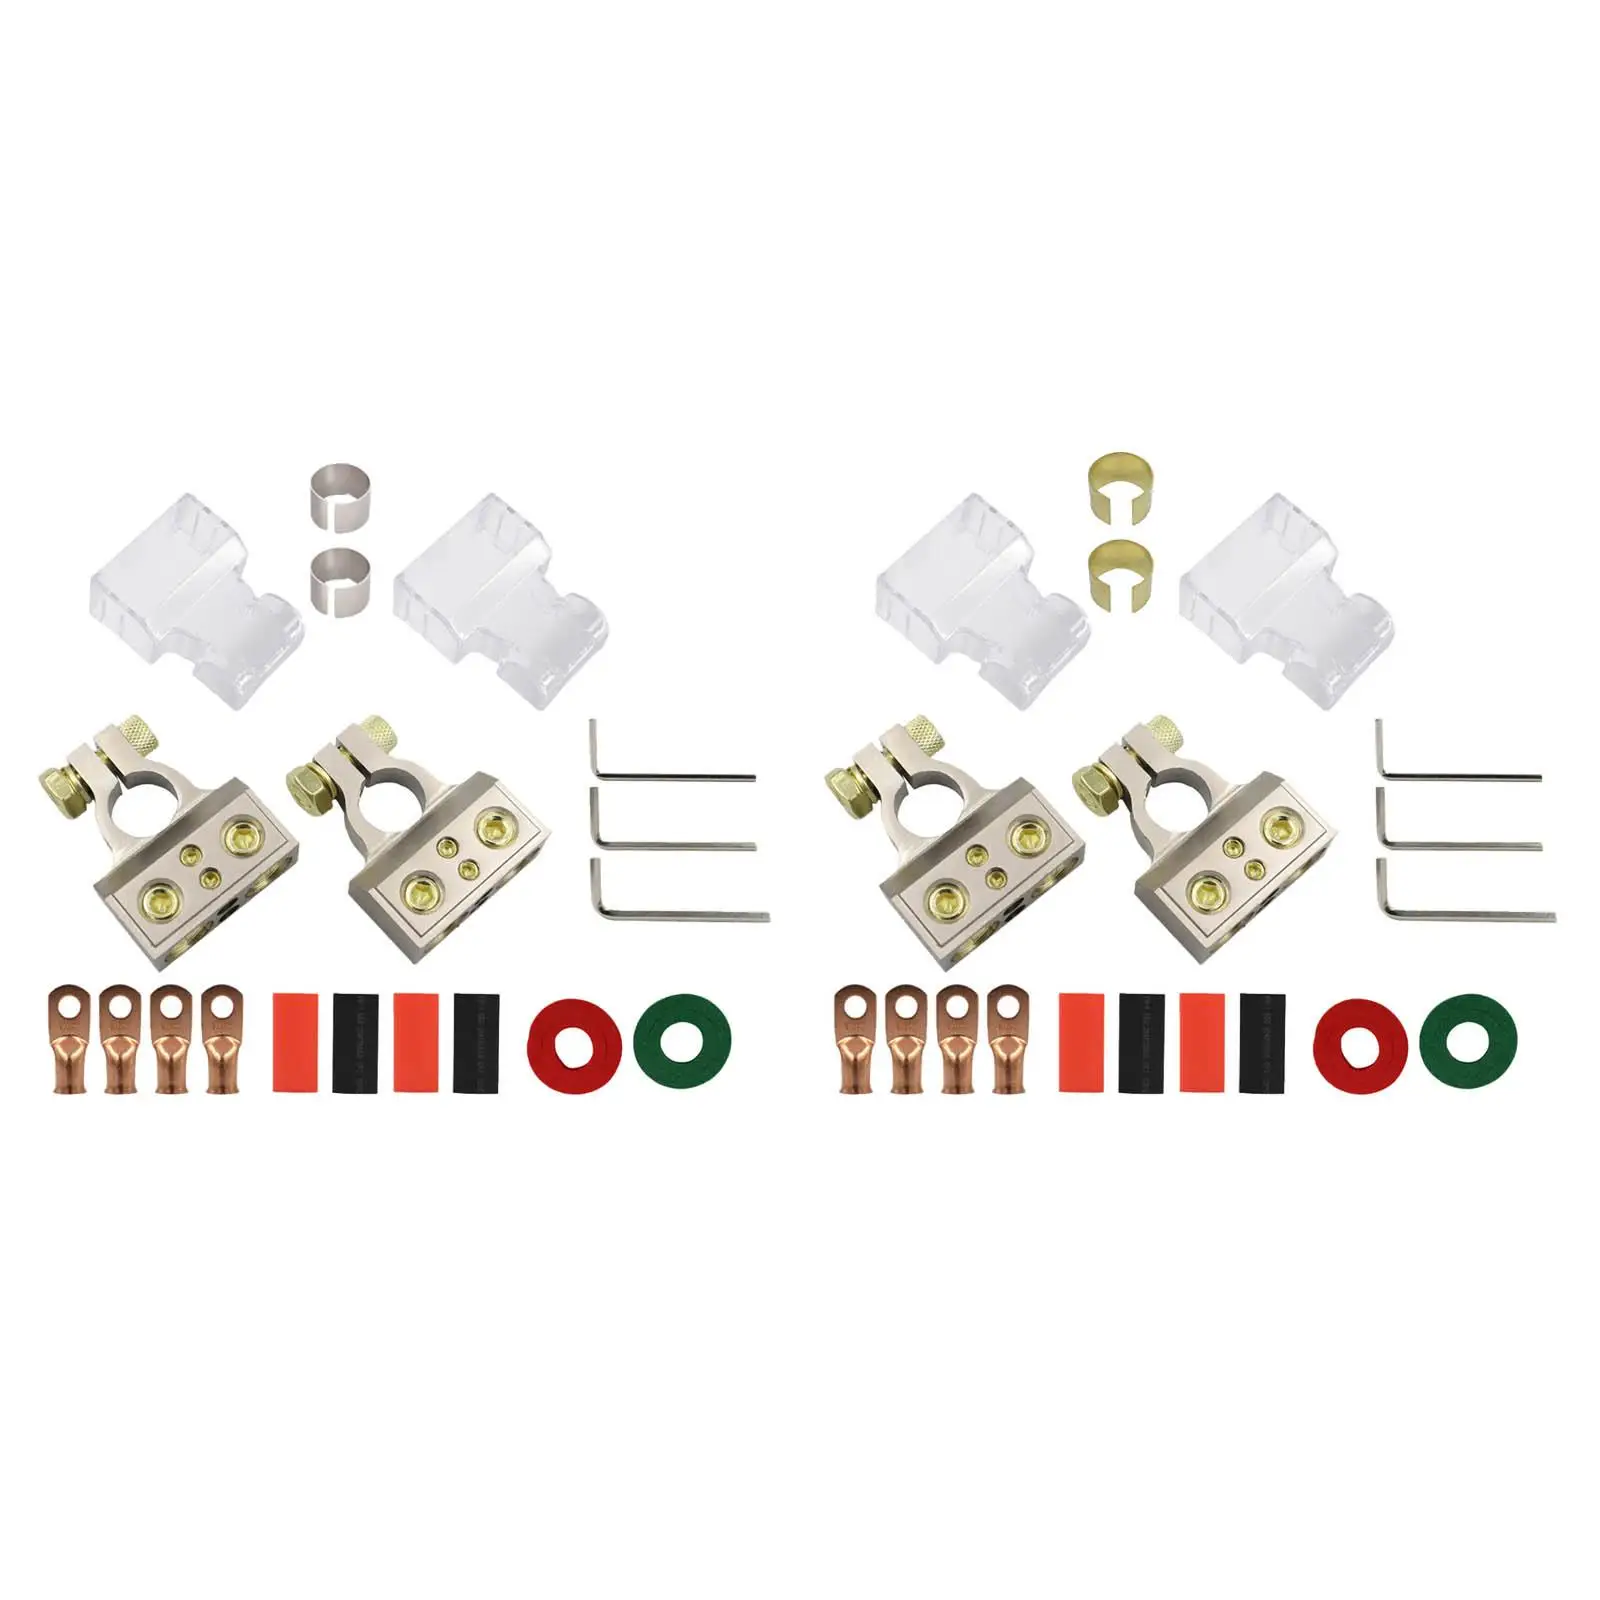 Battery Terminals Connectors Clamps, Upgrade Assortment Kit for Vehicle Marine